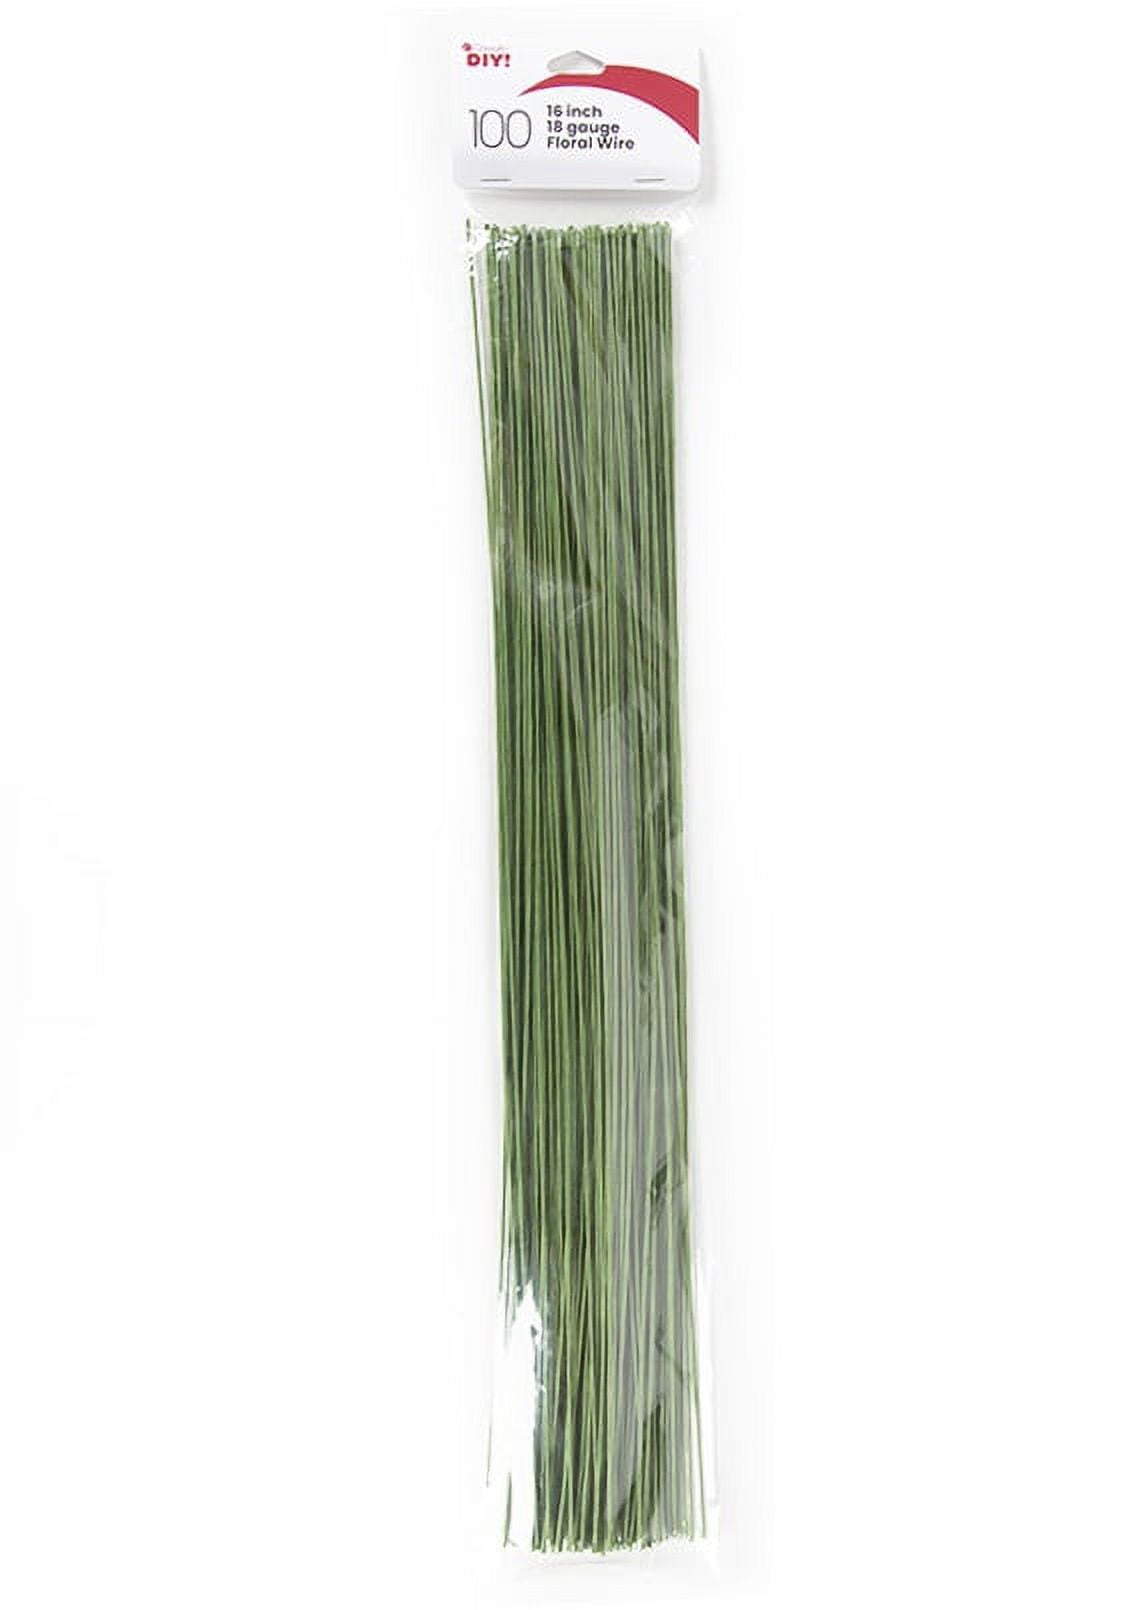 18 Gauge Green Floral Wire - Pack of 25